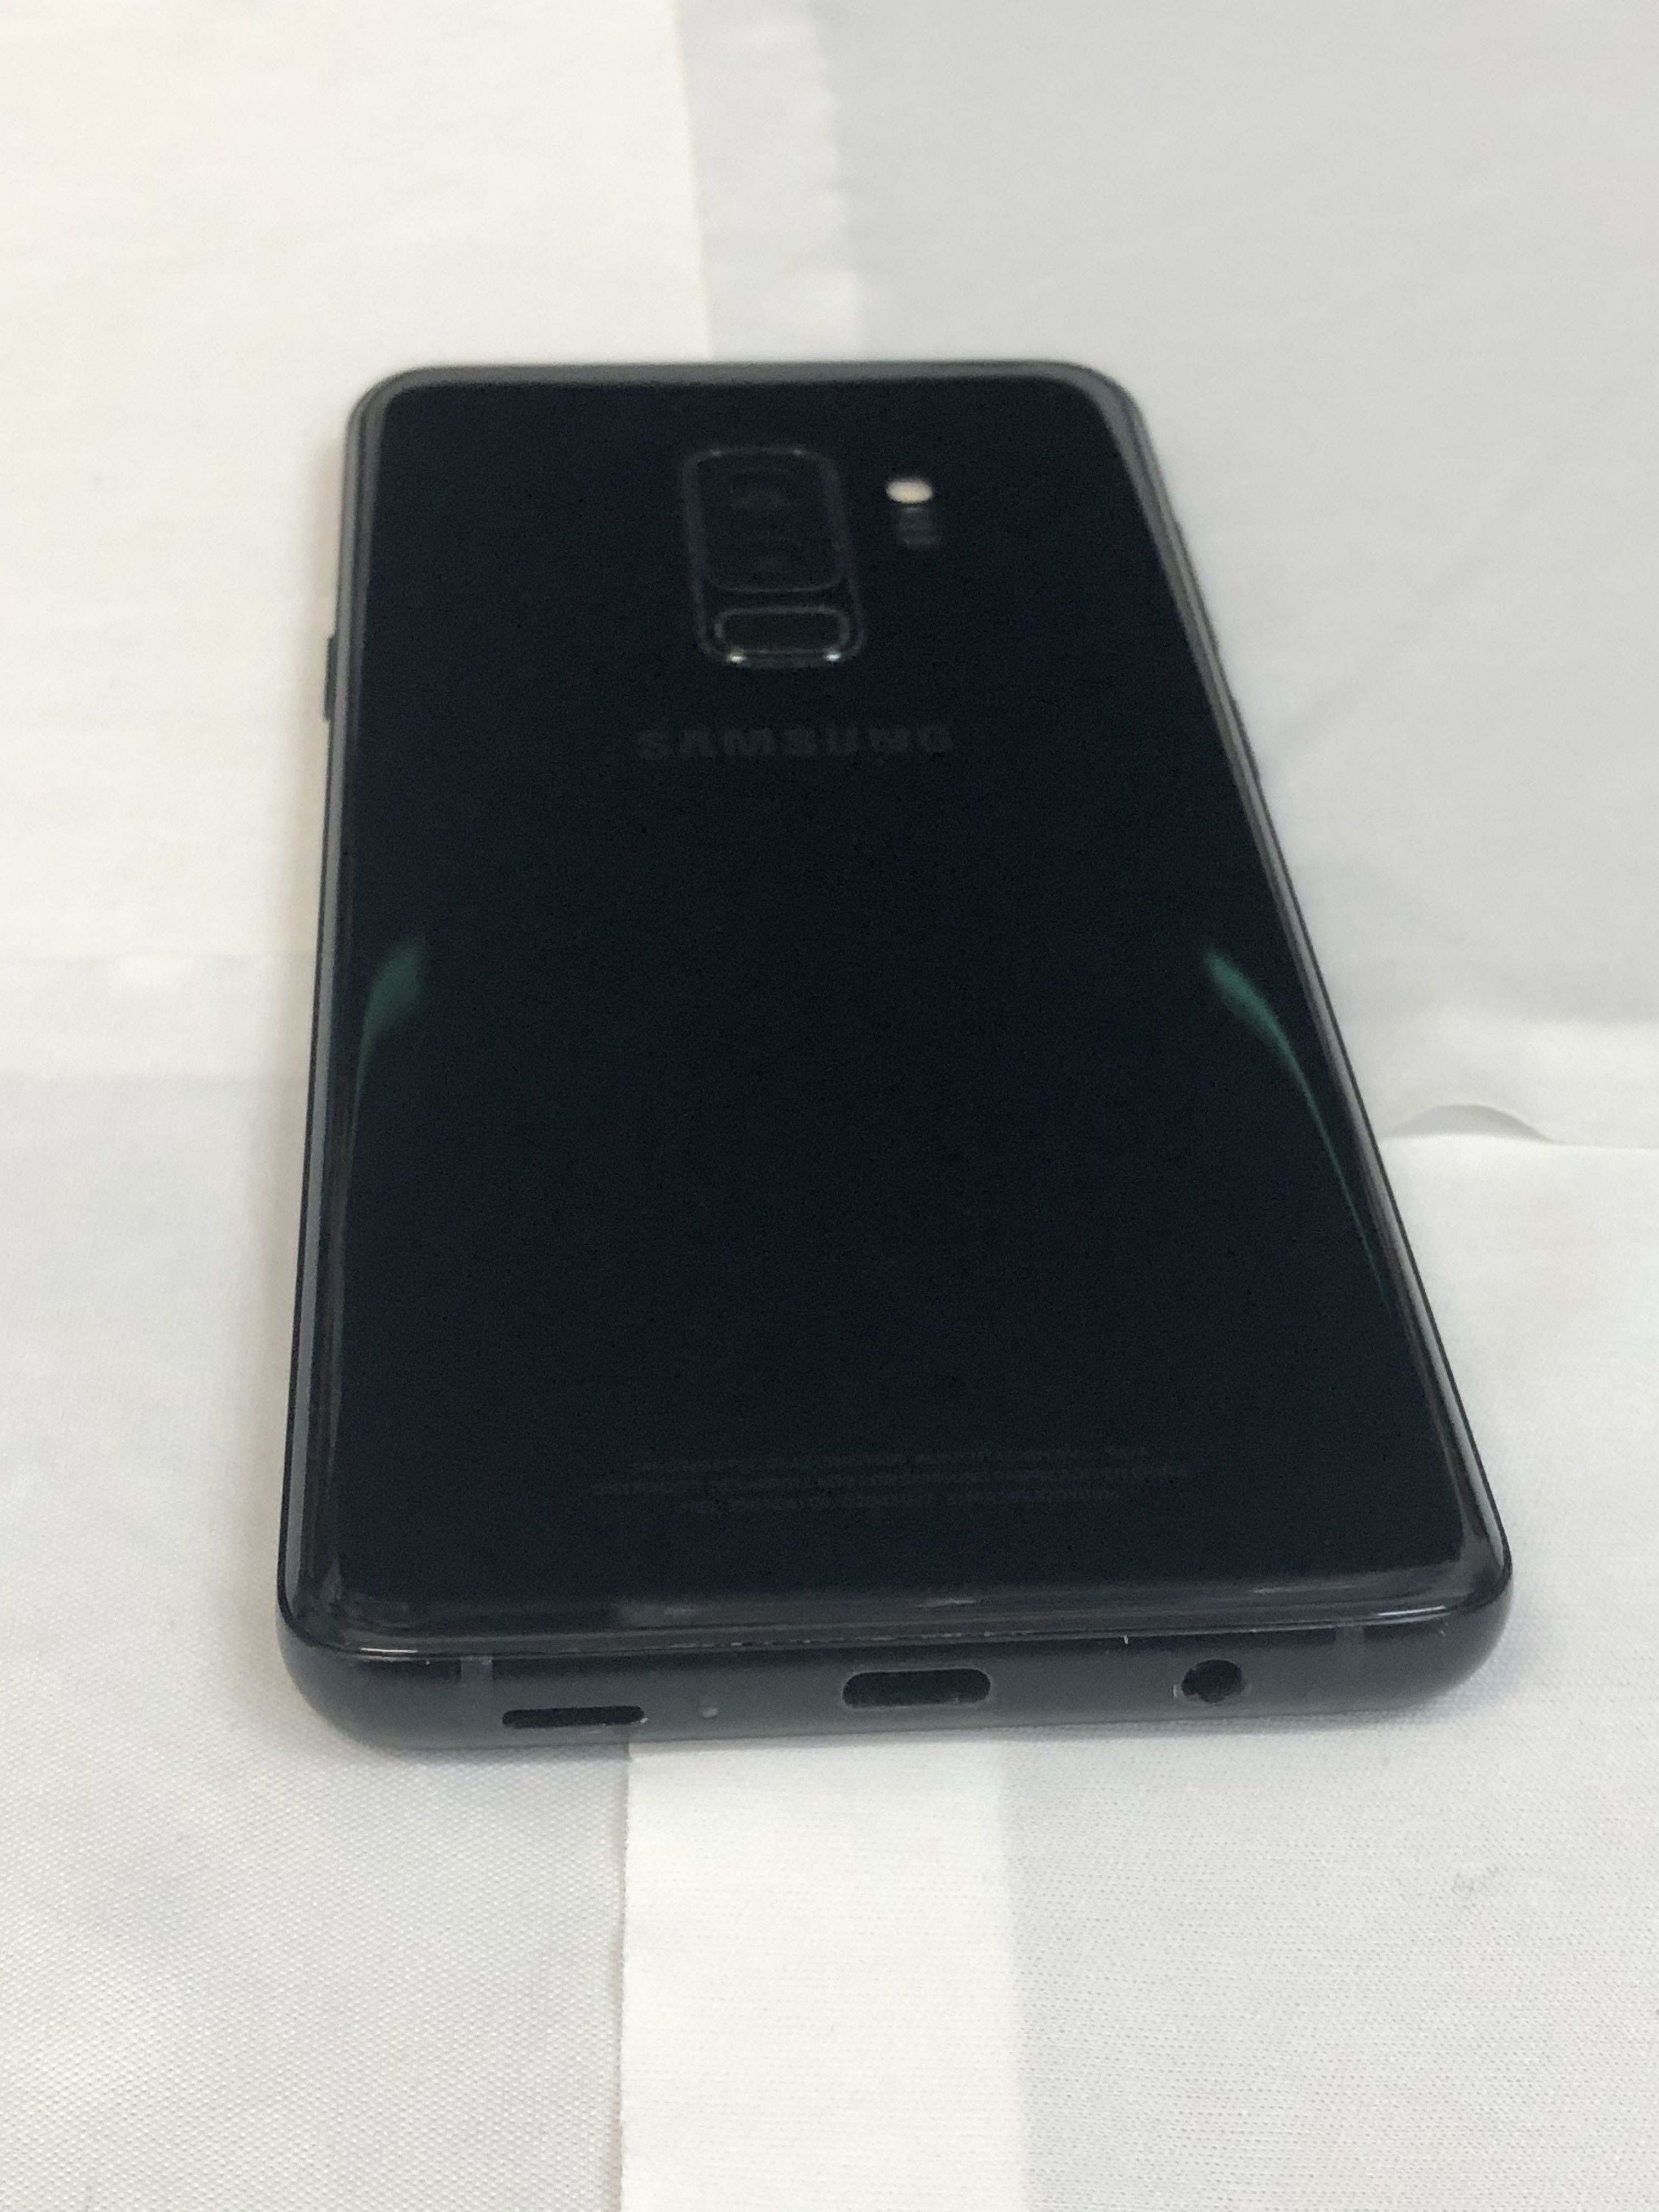 Samsung Galaxy S9+ 256GB || Black || *UNLOCKED* for AT&T / Cricket / T-Mobile / MetroPCS / Simple Mobile / Sprint / Verizon / others WORLDWIDE